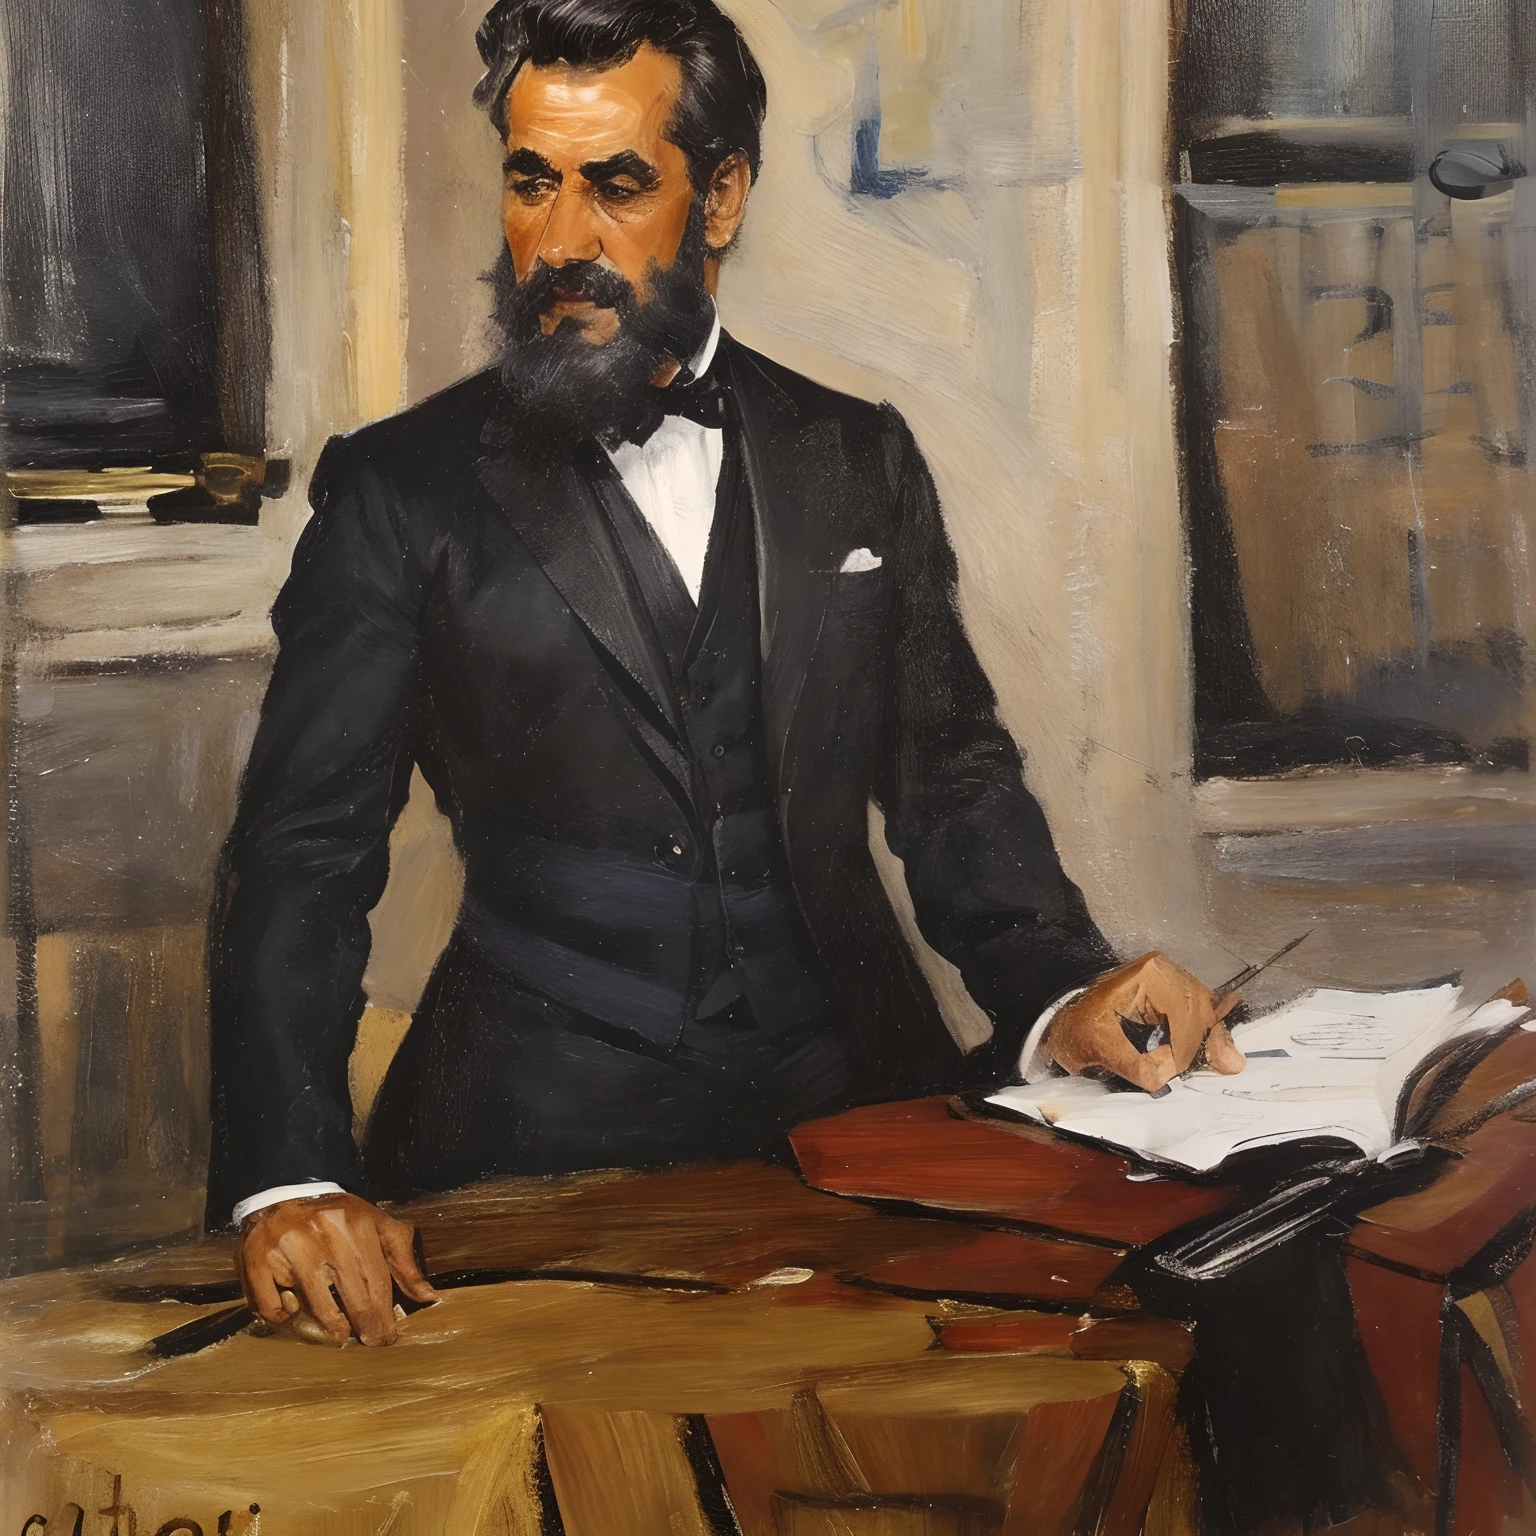 (best quality,highres),Realistic,portraite,18,portraits,Man,governor,56 years old,suit,tie,posingsolo,classic attire,Serious expression,formal dress,Richly detailed clothing,Dignified pose,victorian era,vindima,black andwhite,High contrast lighting,Shadows Dramatic,facial hair,mature face,Distinctive features,sharp focus,aged appearance,artistically created background,lines sharp,intricate patterns,meticulous brushstroke,varied textures,Stunning realism,vivid colors,attention to detail,age-appropriate wrinkles,carefully rendered eyes,intense stare,imposing presence,pose framed by ornate frame